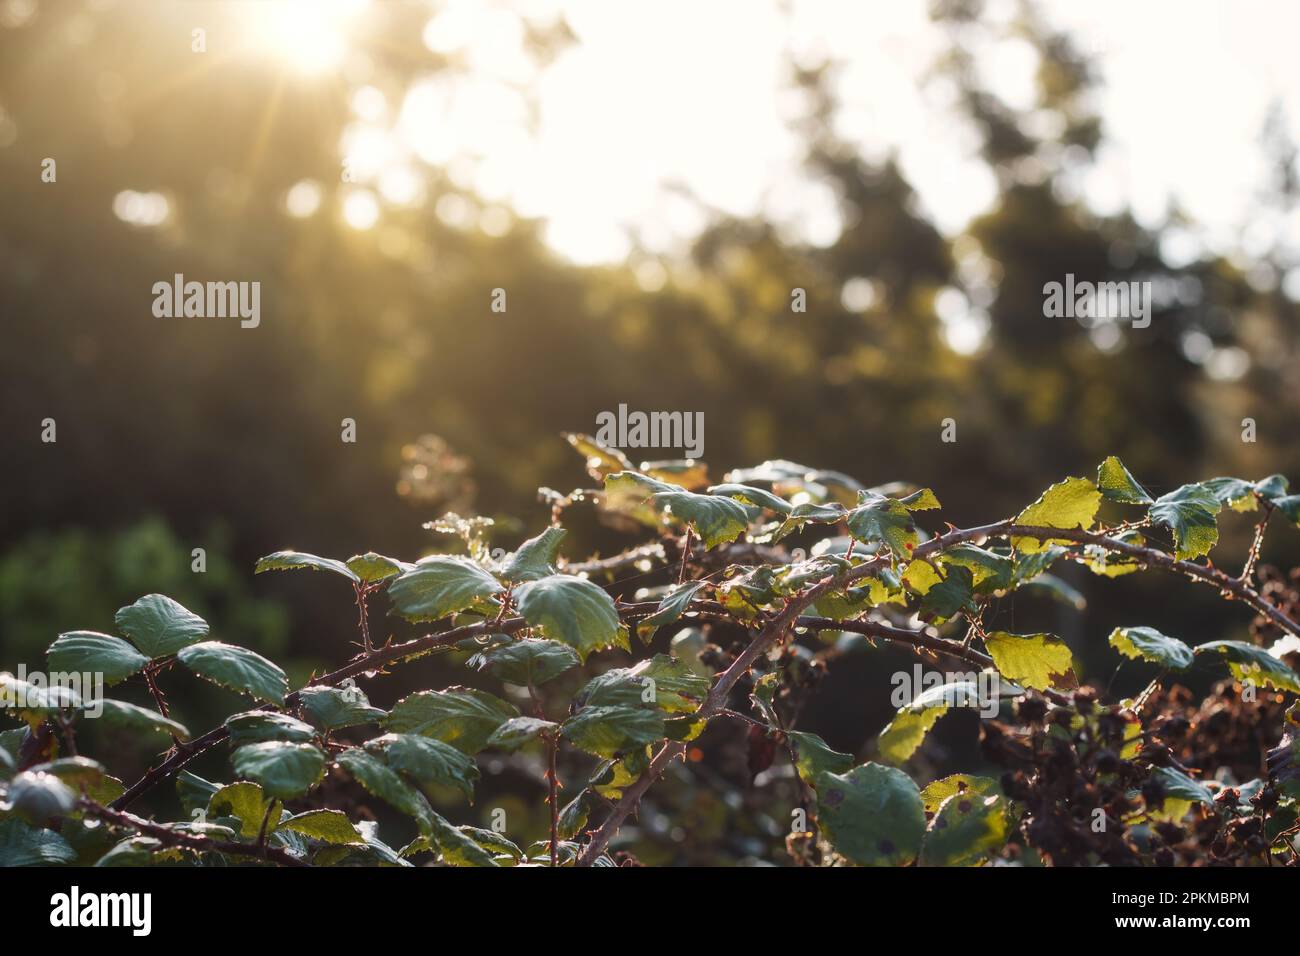 A thorny bramble or blackberry bush (Rubus fruticosa) in a forest with the dawn sun glowing in the background Stock Photo